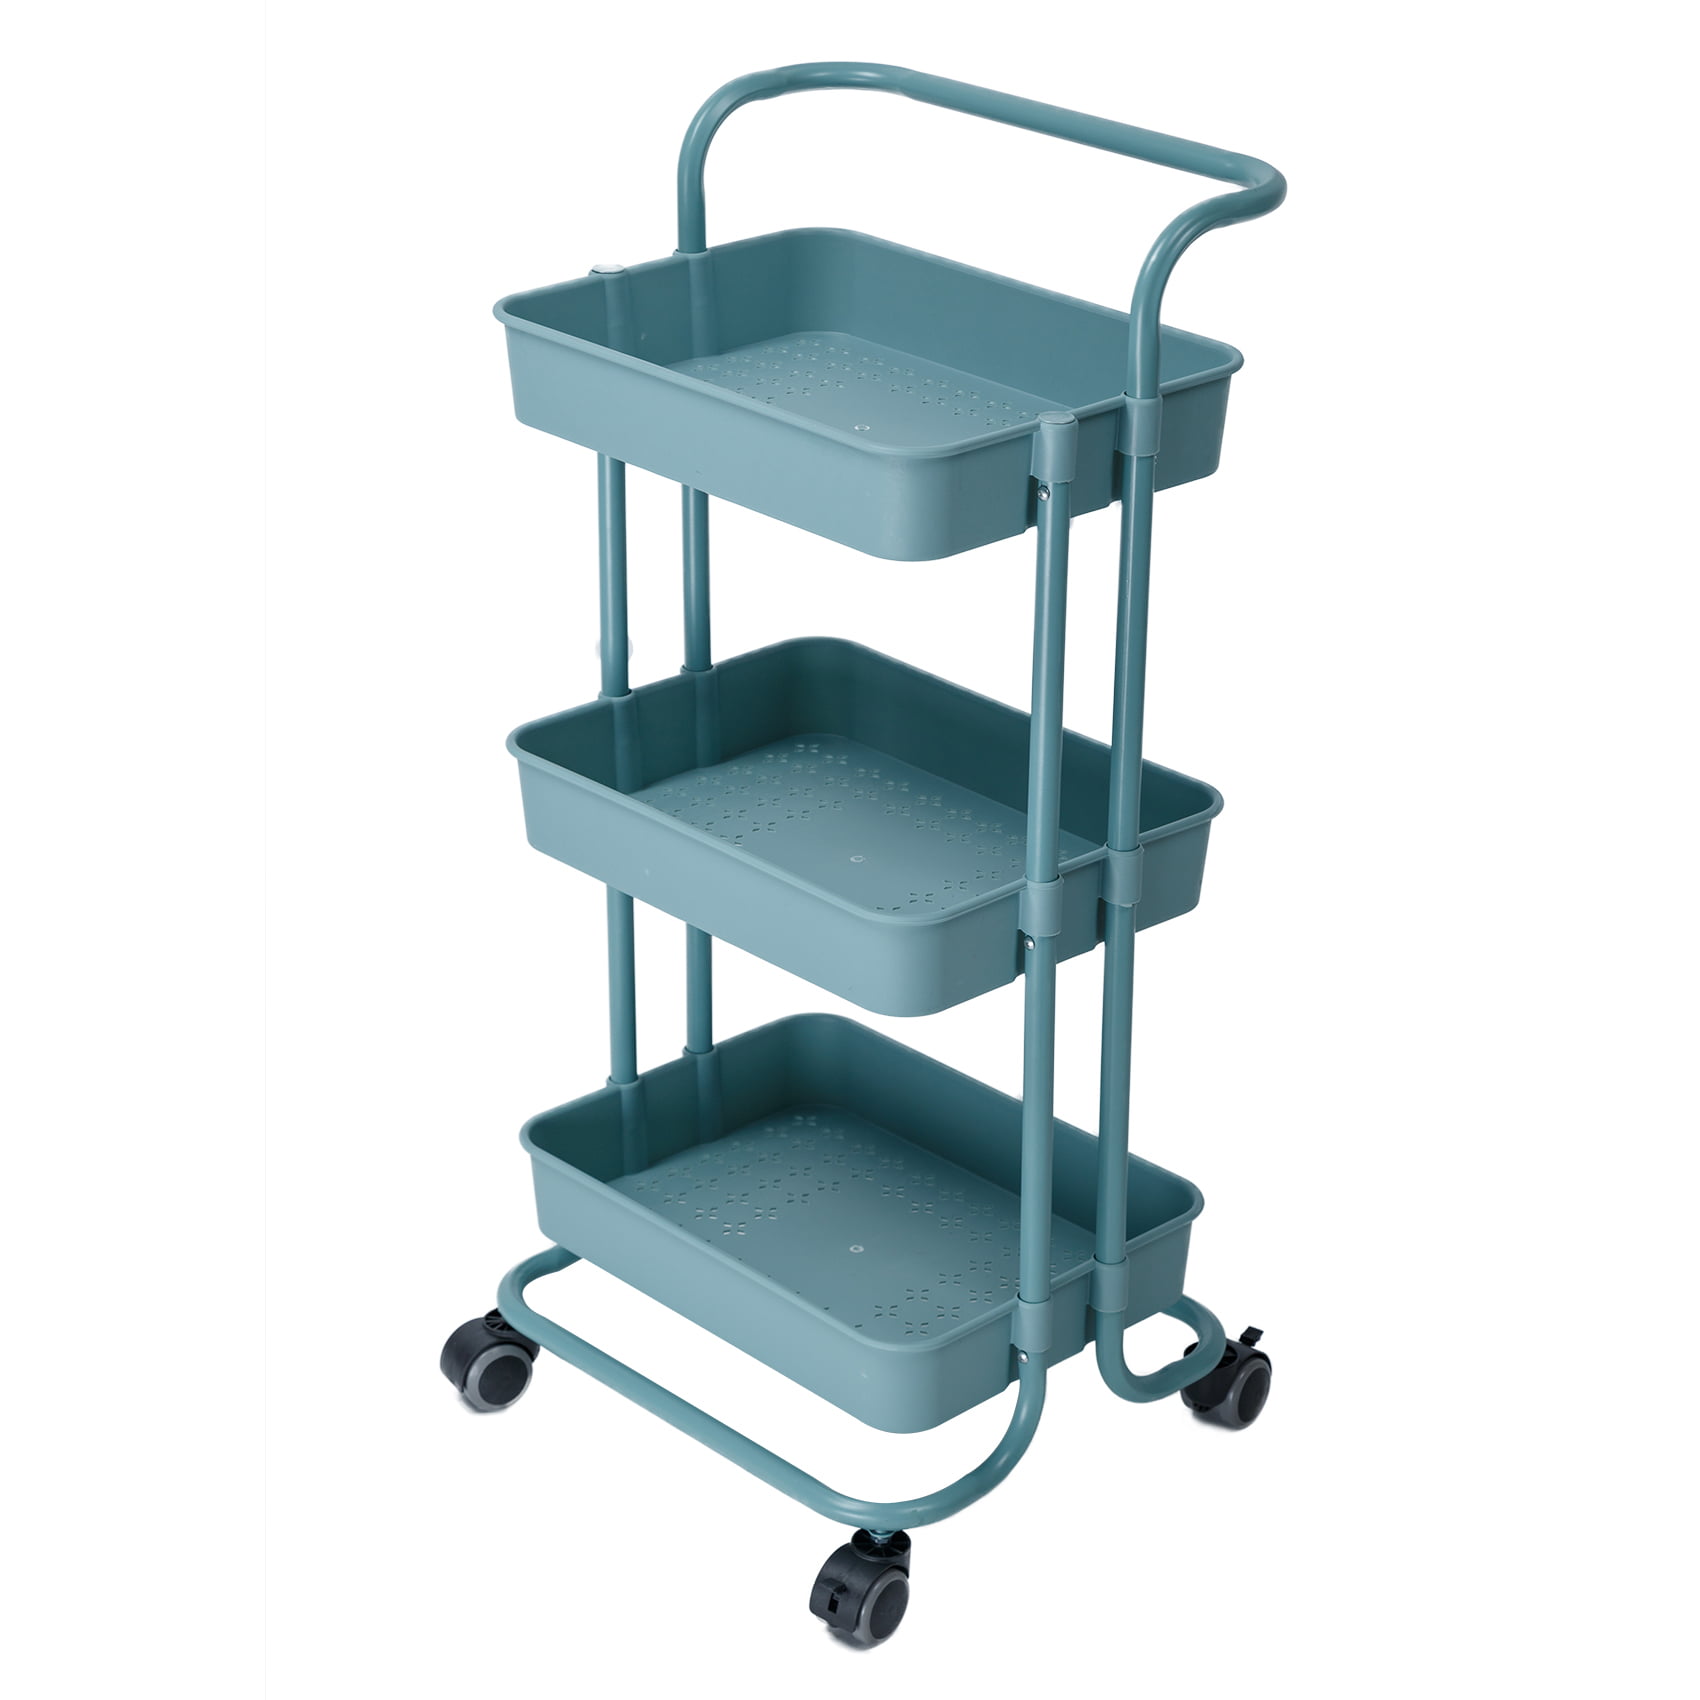 White Ceeyali 3-Tier Rolling Utility Cart Storage Shelf Multifunction Organizer Storage Cart with Handle and Lockable Wheels and 3PCS Cup for Home Kitchen,Bathroom,Office,Laundry Room etc.